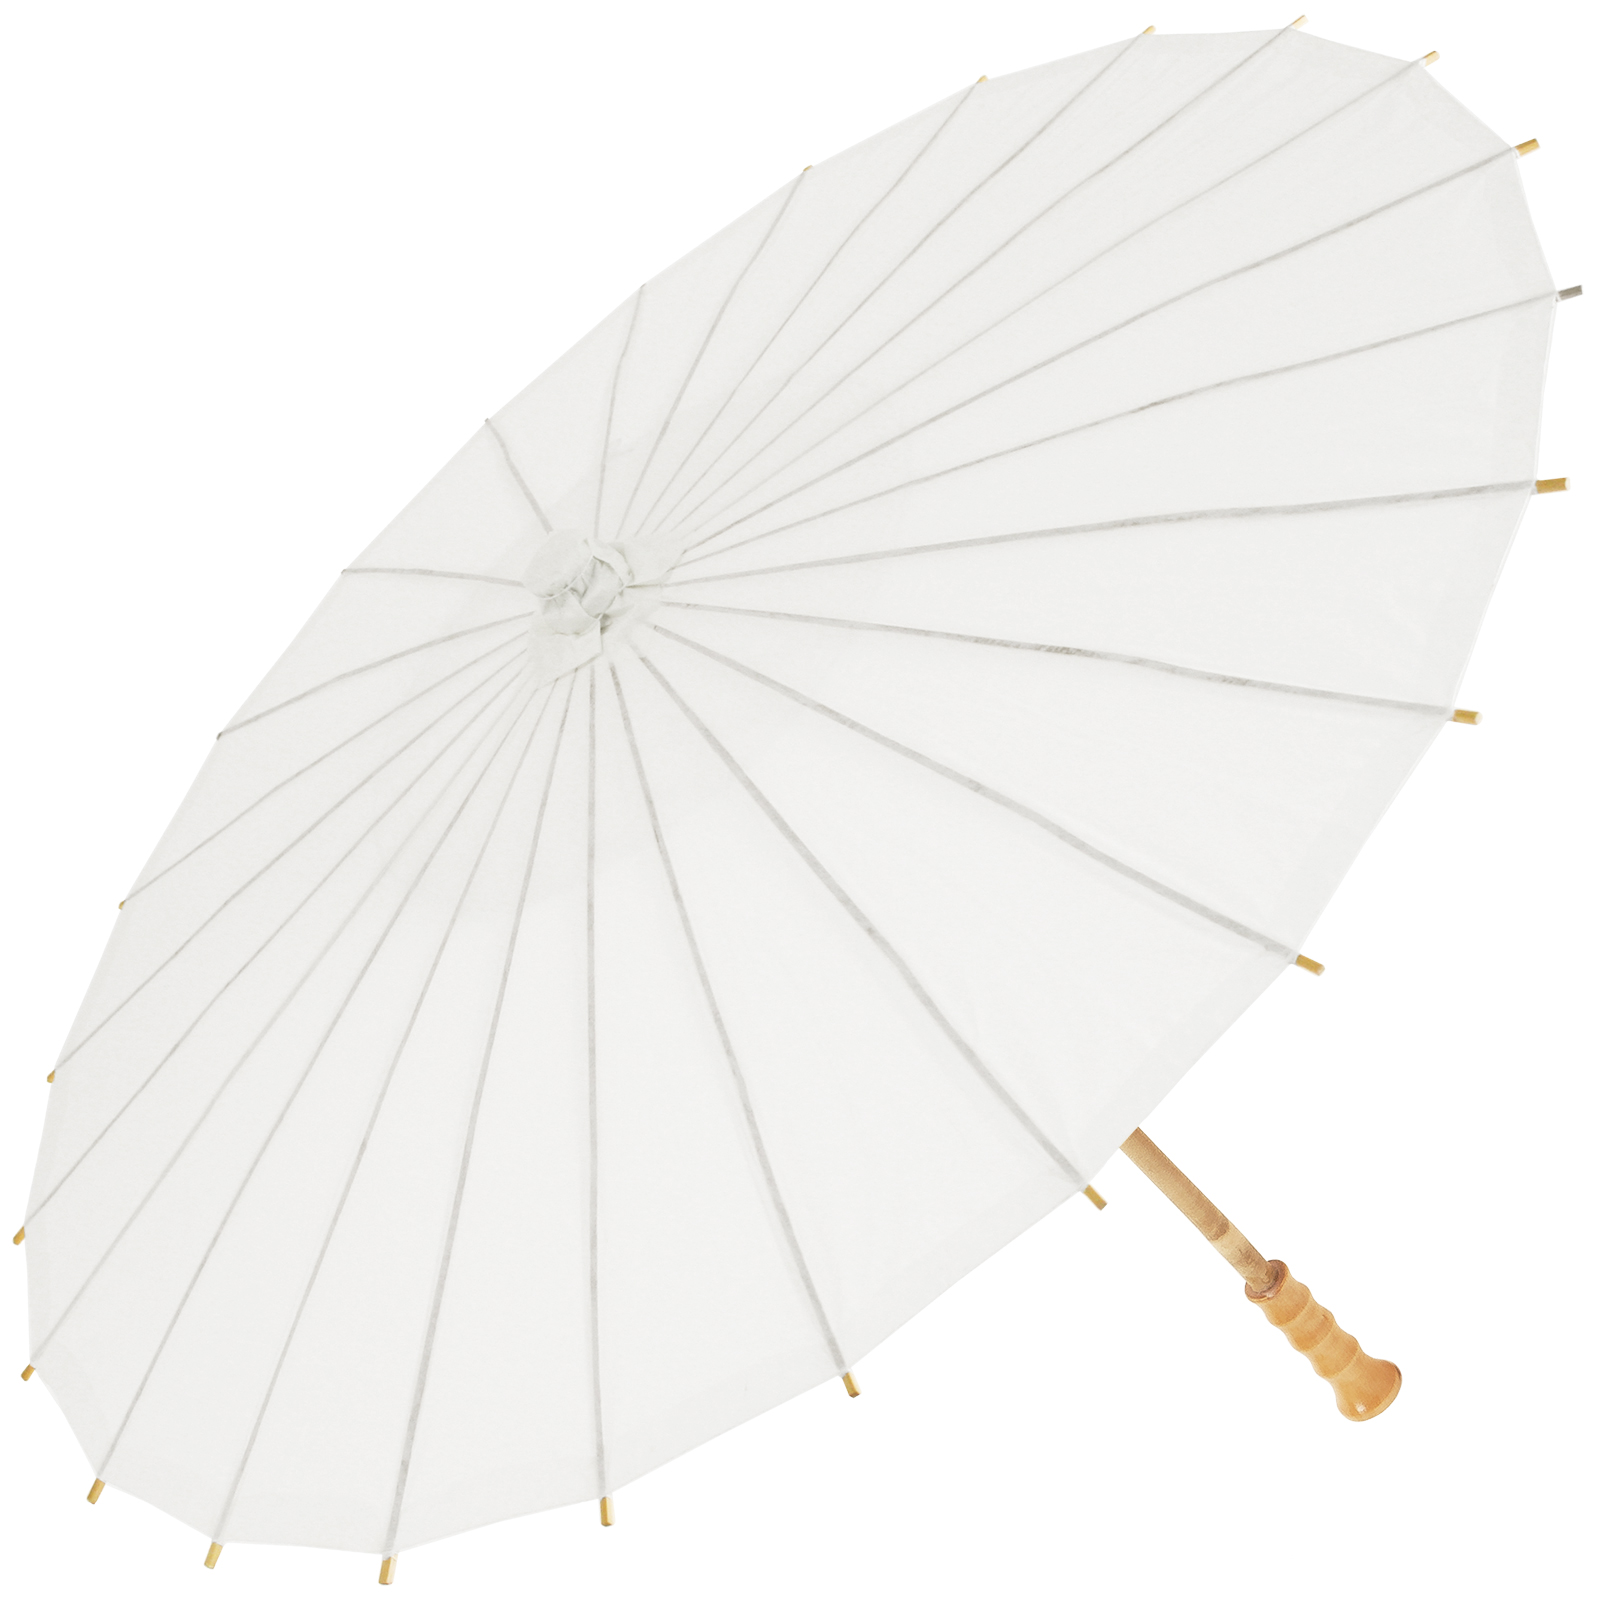 Chinese Paper and Bamboo Parasol with Elegant Handle - Wedding White